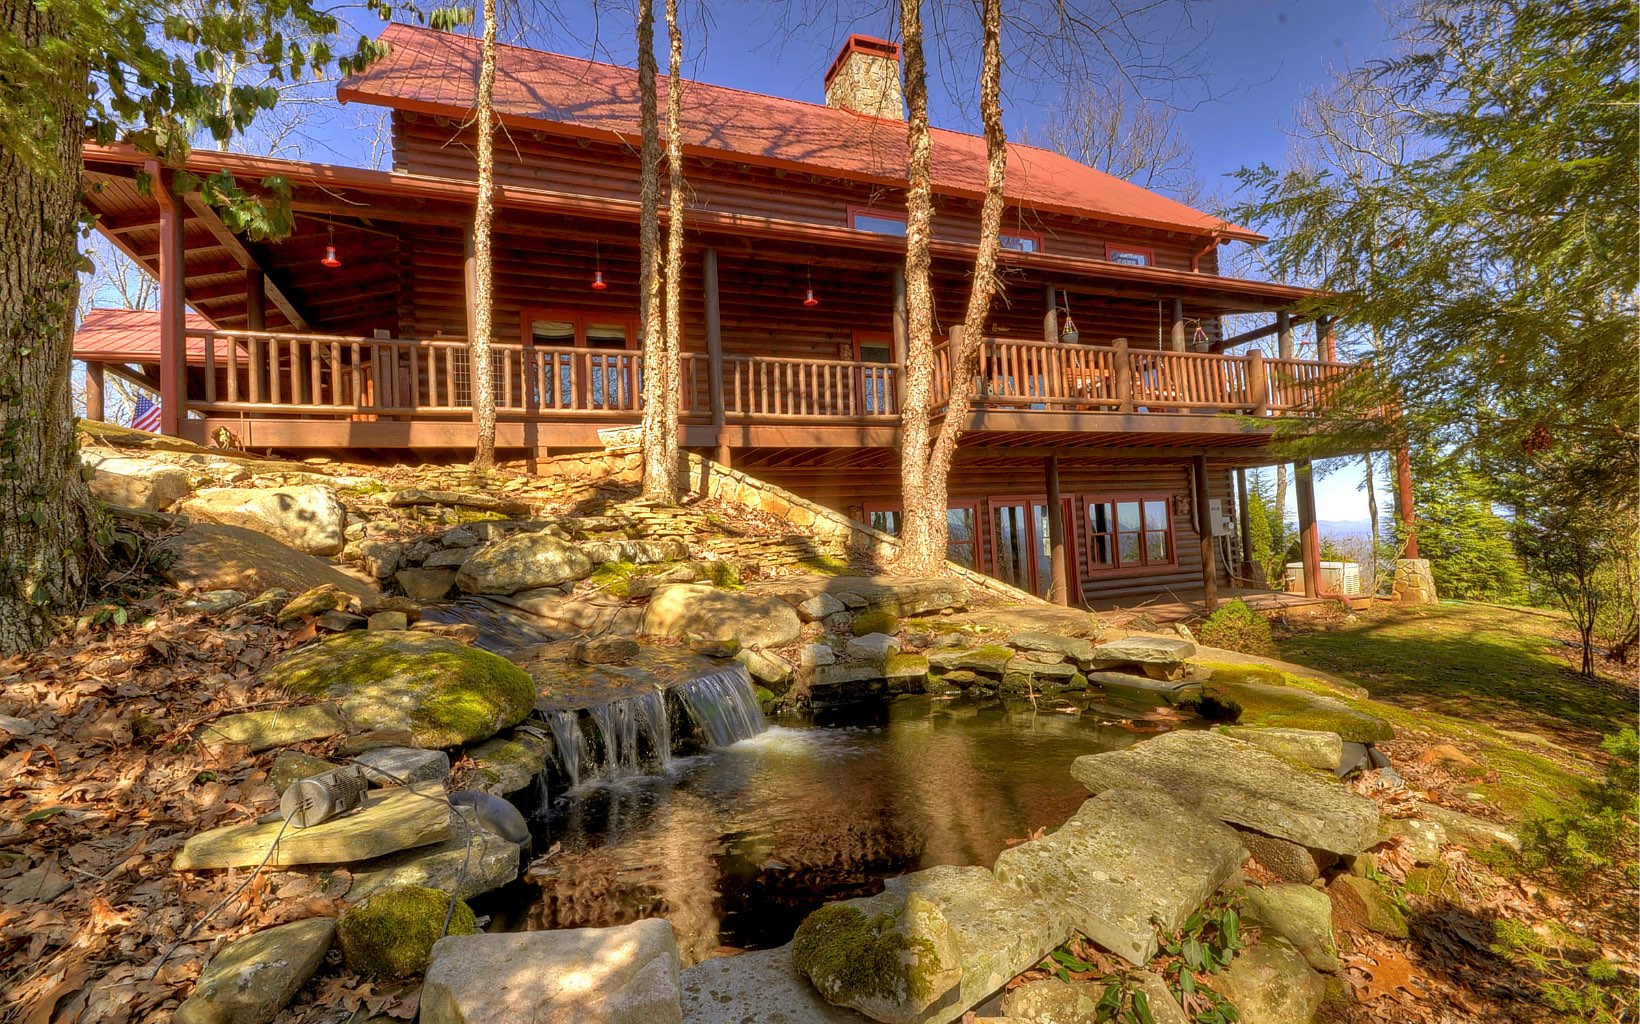 Introducing The Lodge at Fox Mtn off Big Creek.The ambiance of this magnificent mtn dream home begins as you cross the Old Covered Bridge. Pass thru the gates & begin the enchanted, winding, drive thru 23.85 ac. of one of the most scenic prop. in N GA. Park under the Porte Cochere, and enter into the cozy foyer. Beautiful lg kitchen w/upgraded appliances. Vaulted ceilings w/ex. beams . Windows & magical mtn views from every window. Double Mstr. suites on main and upper floor. Lg. Mstr bath w/clawfoot tub, double vanity sinks w/new walk in tile shower. Large living area w/ Grand wood burning stone fp & large seating area. Terrace level features 2 guest BR , guest bath & large living area w/wood burning stove. Relax on the wrap around porch & enjoy the endless long range mtn views & calming sounds of the waterfall that flows into the serene Koi pond . Lg. detached oversized garage, workshop and partially enclosed pole barn.